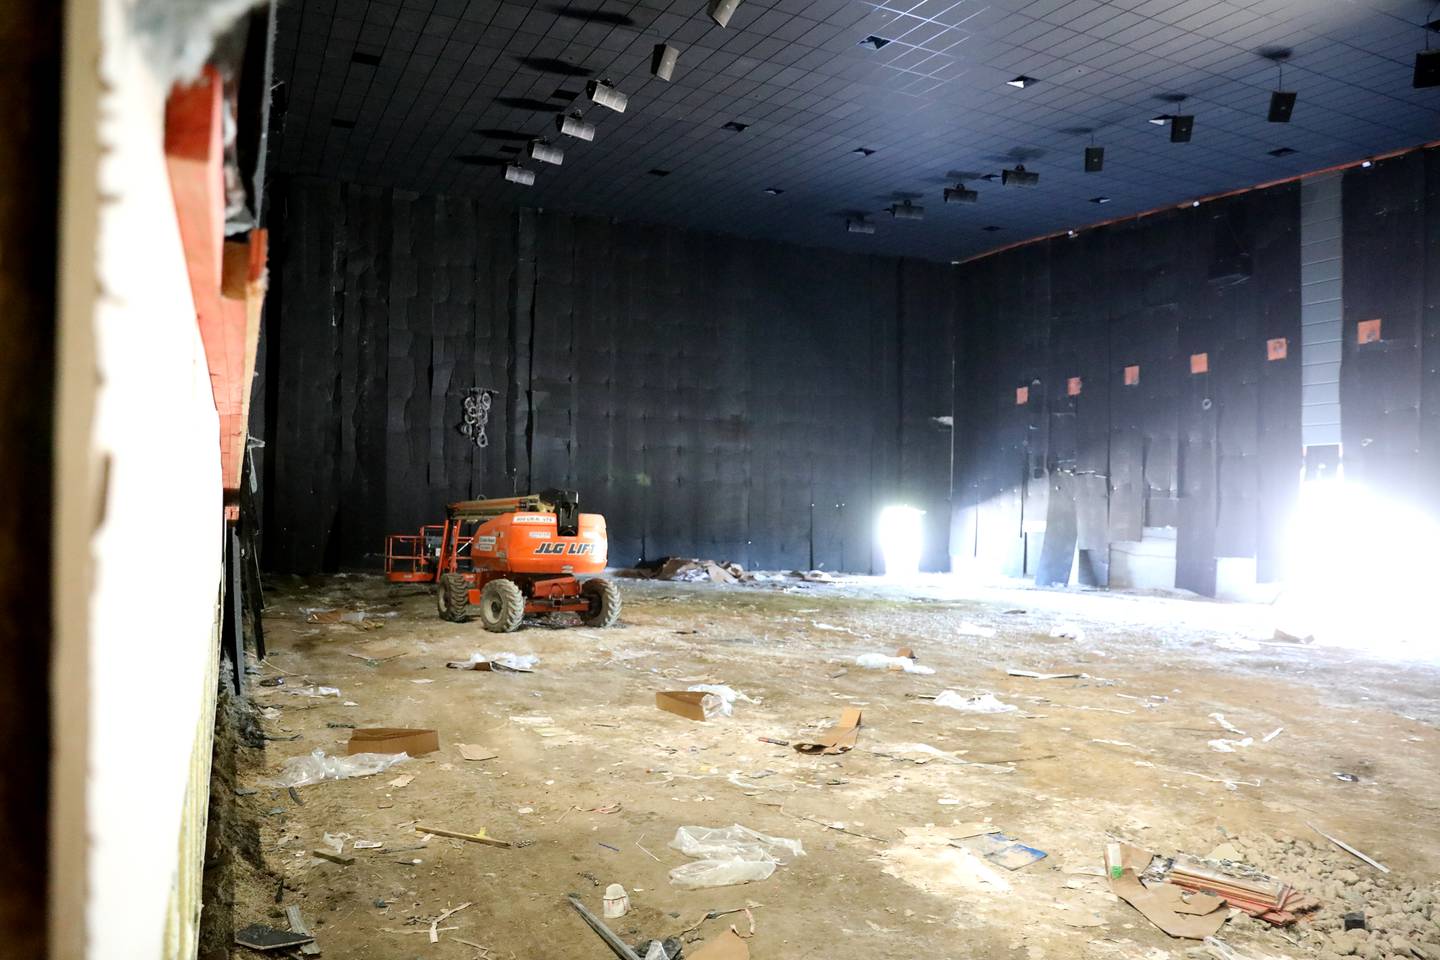 The Super EMX auditorium, designed to be the largest Cinemascope® screen in the state of Illinois, at the new Emagine Batavia movie theatre. The theatre will open to the public on June 1, 2023.